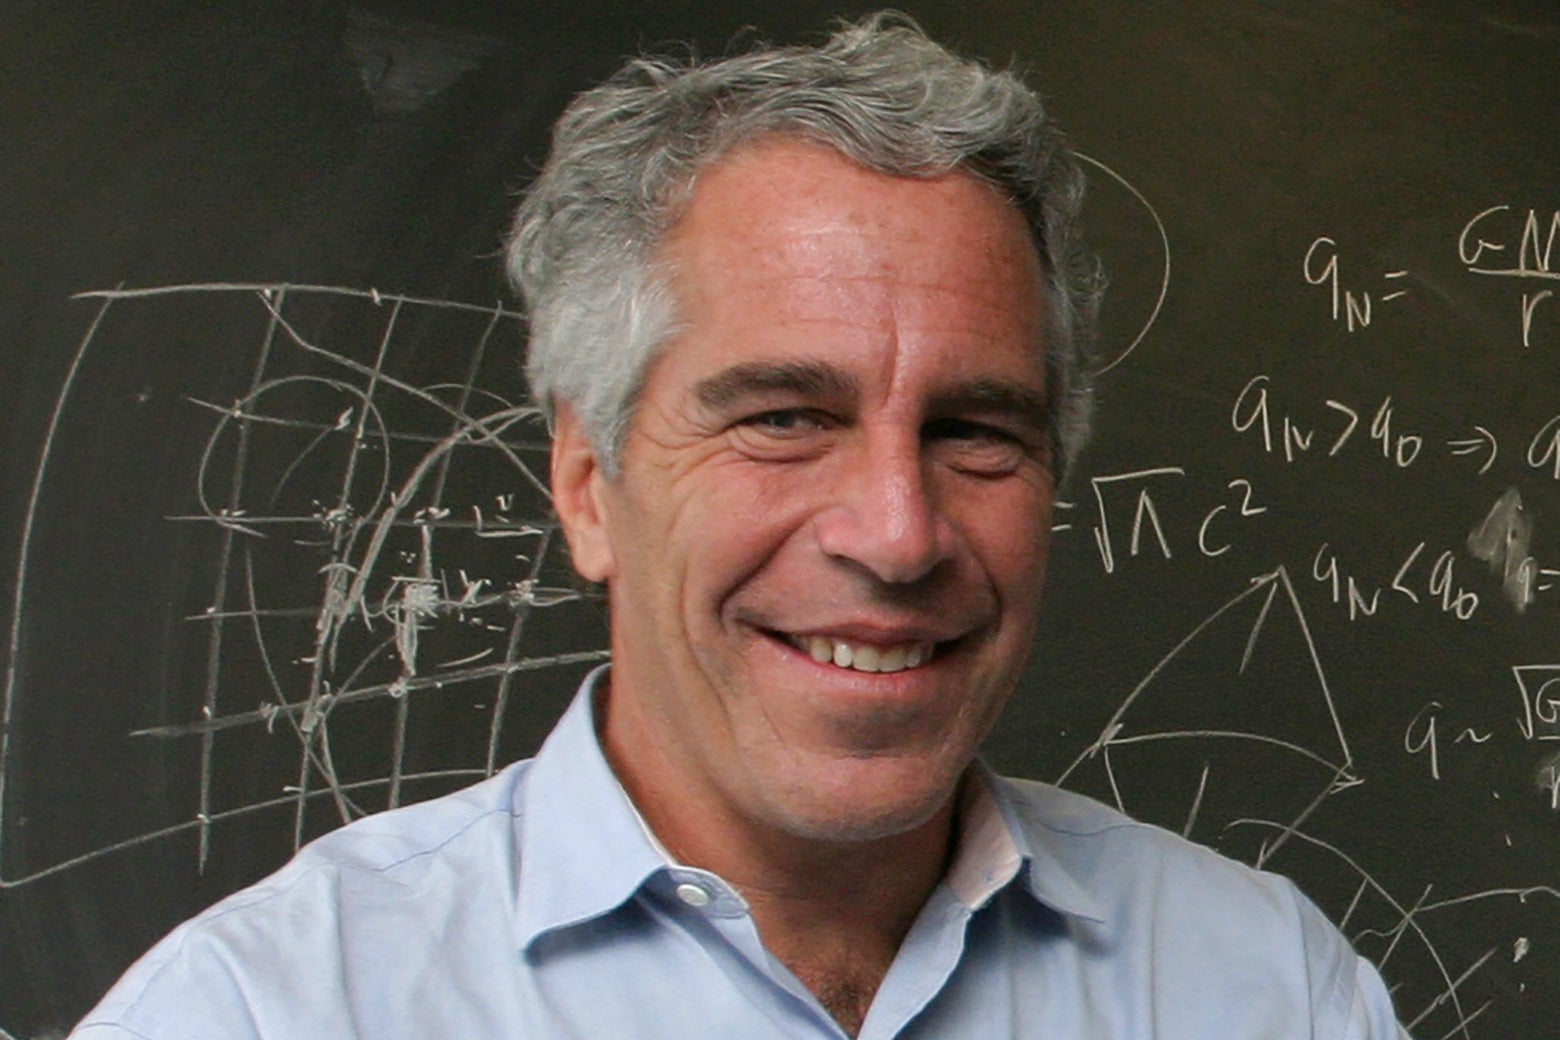 Jeffrey Epstein in front of a chalkboard with mathematical things written on it.